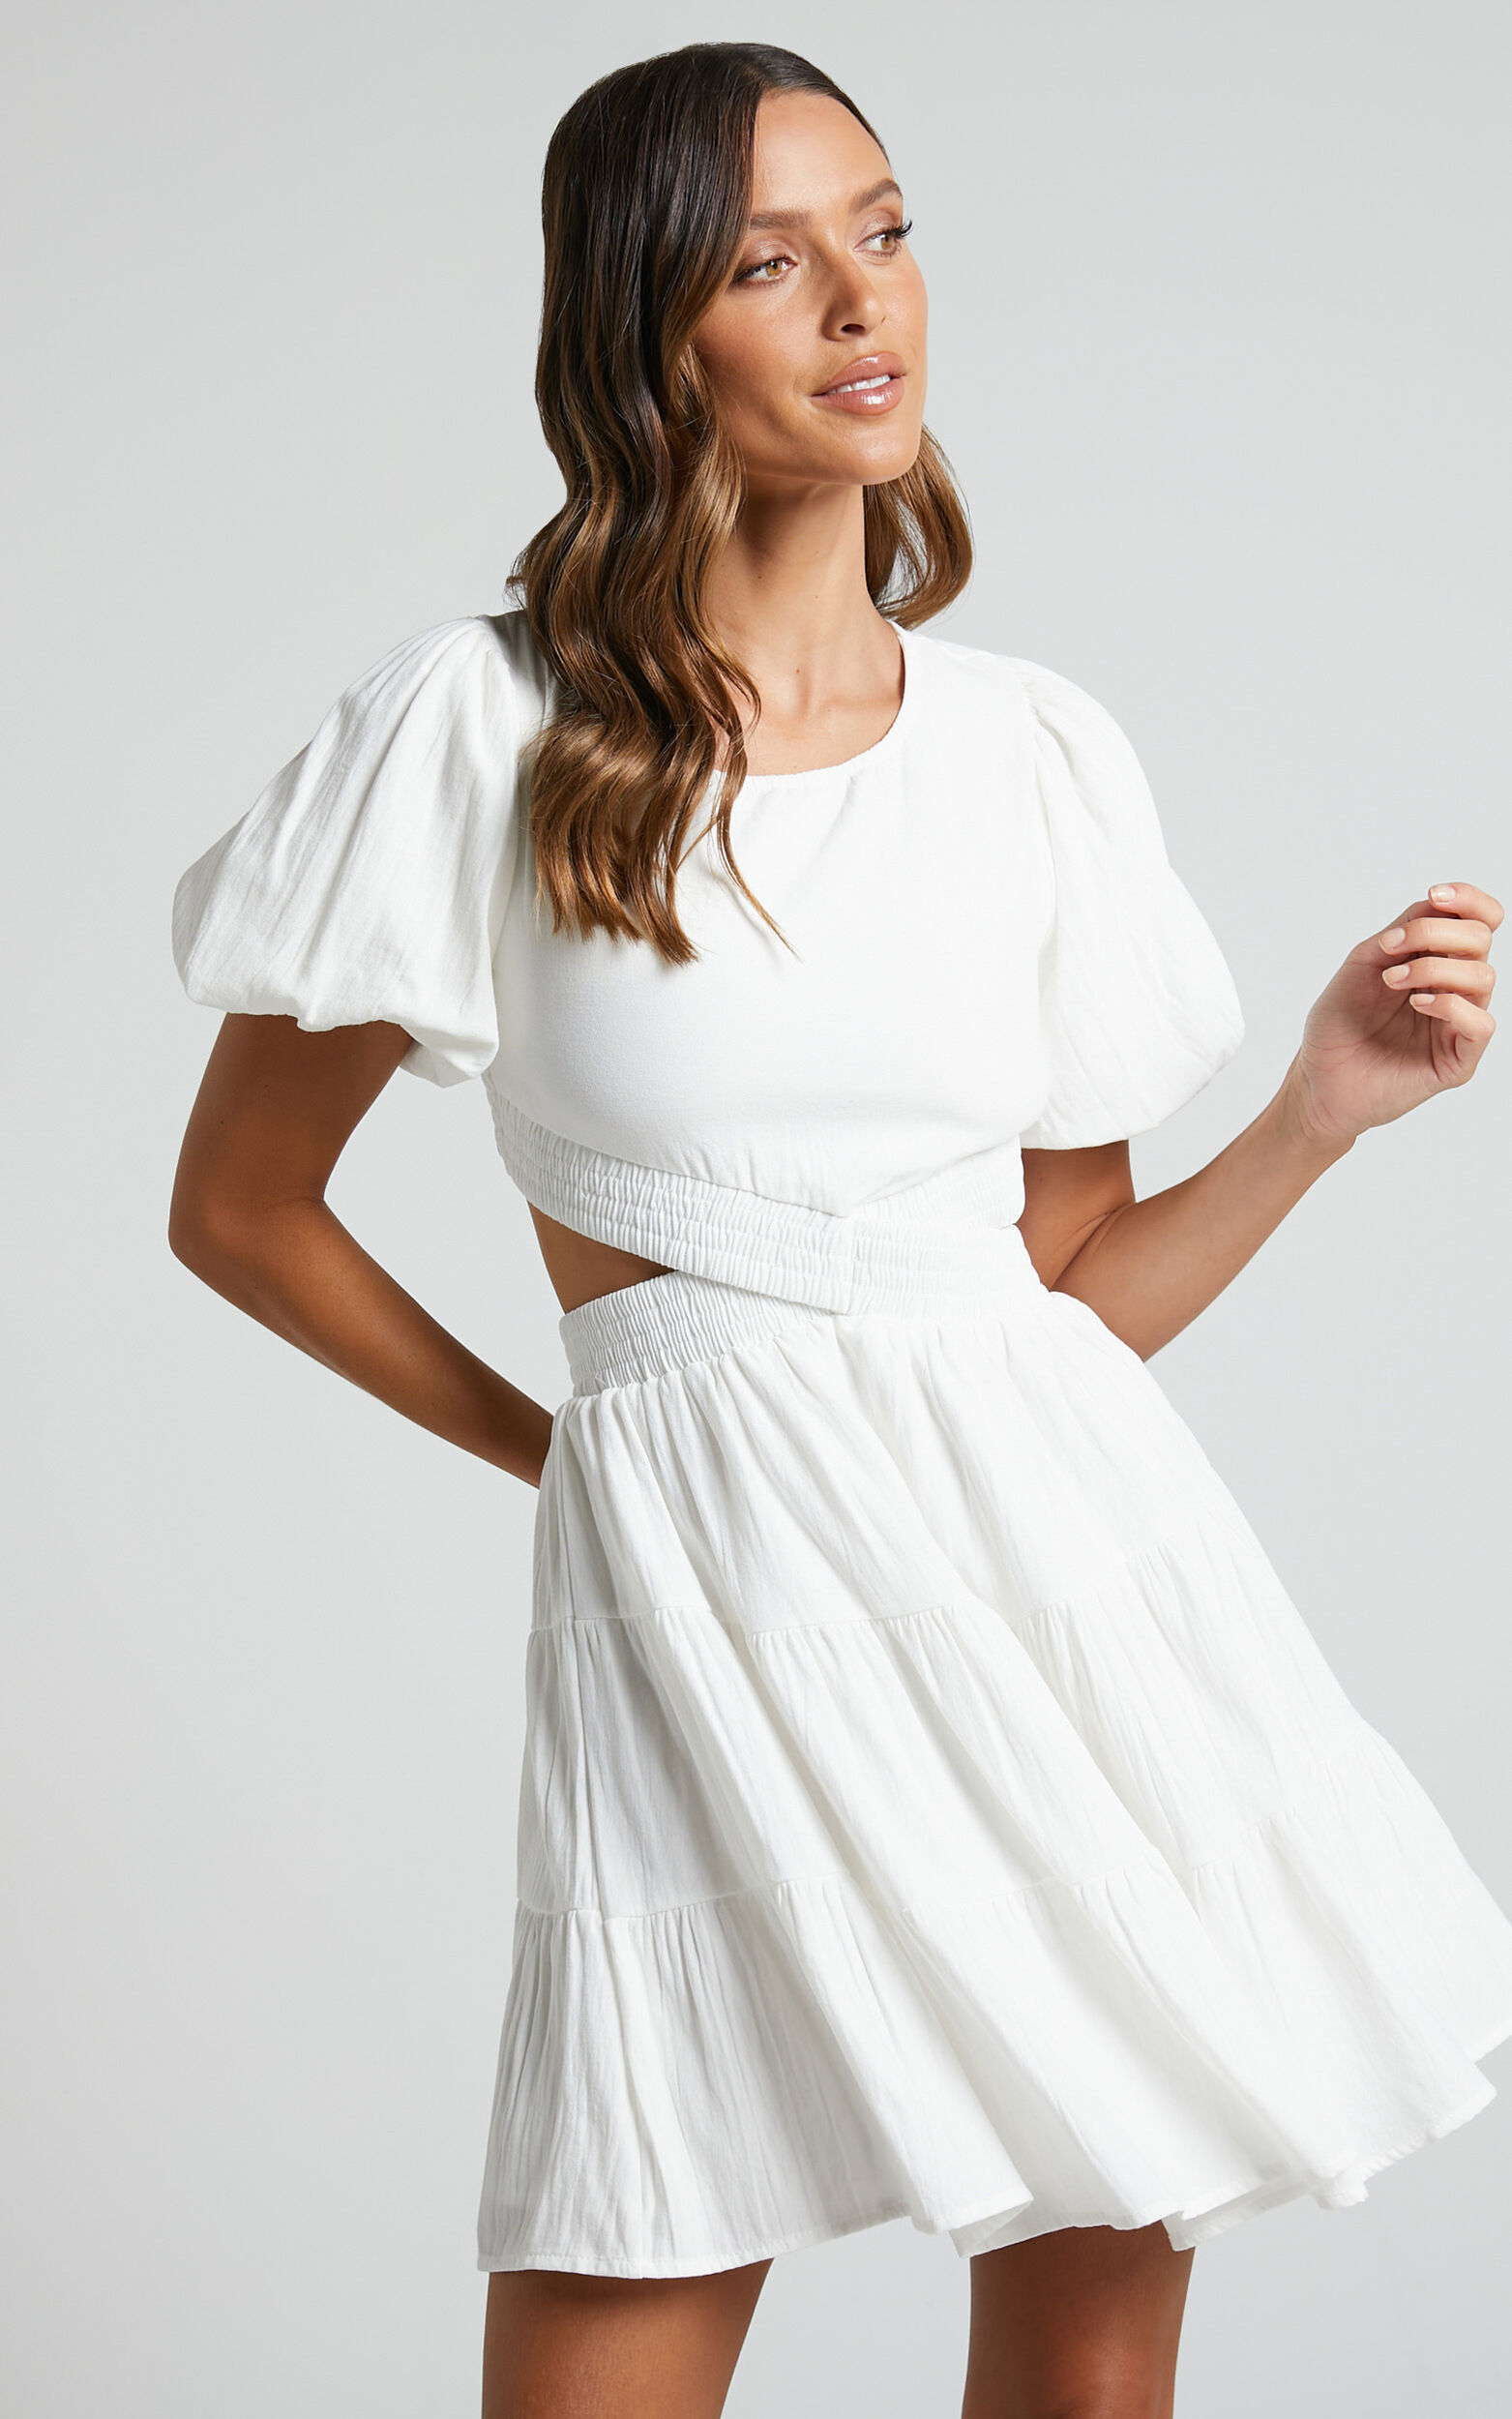 Ramona Mini Dress - Scoop Neck Cut Out Tiered Dress in White - 06, WHT1